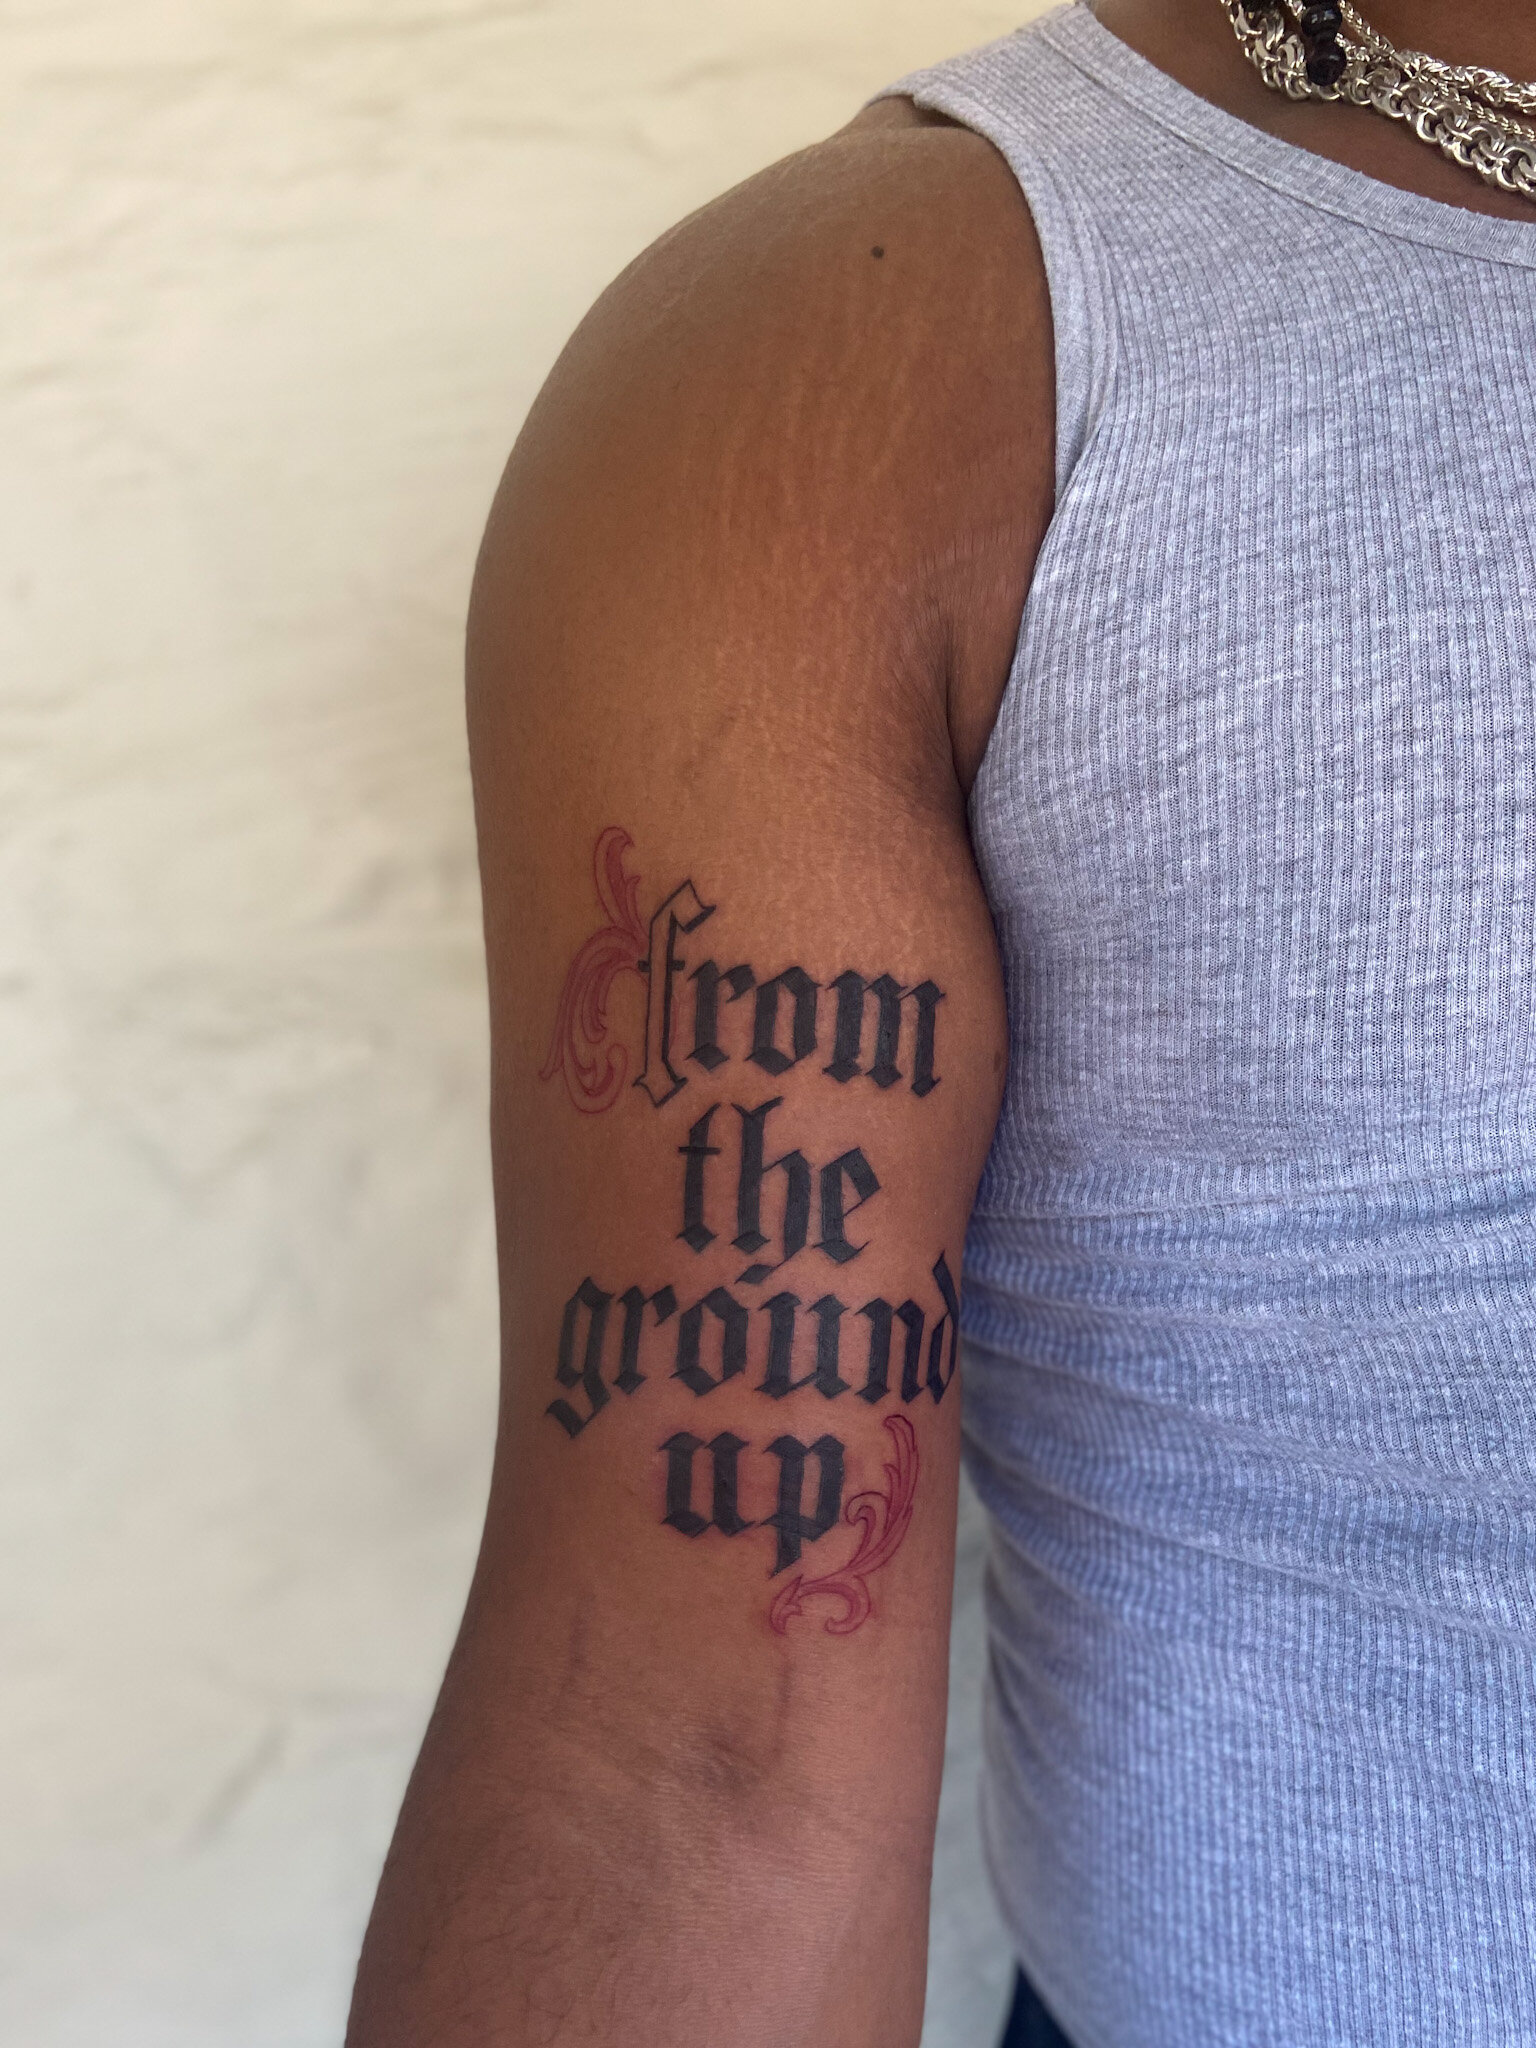  Black letter/ old English style calligraphy tattoo. The lettering tattoo is on a very muscular bicep of a man with deep melanin skin tone. The tattoo says “from the ground up” with a red flourishing design.  